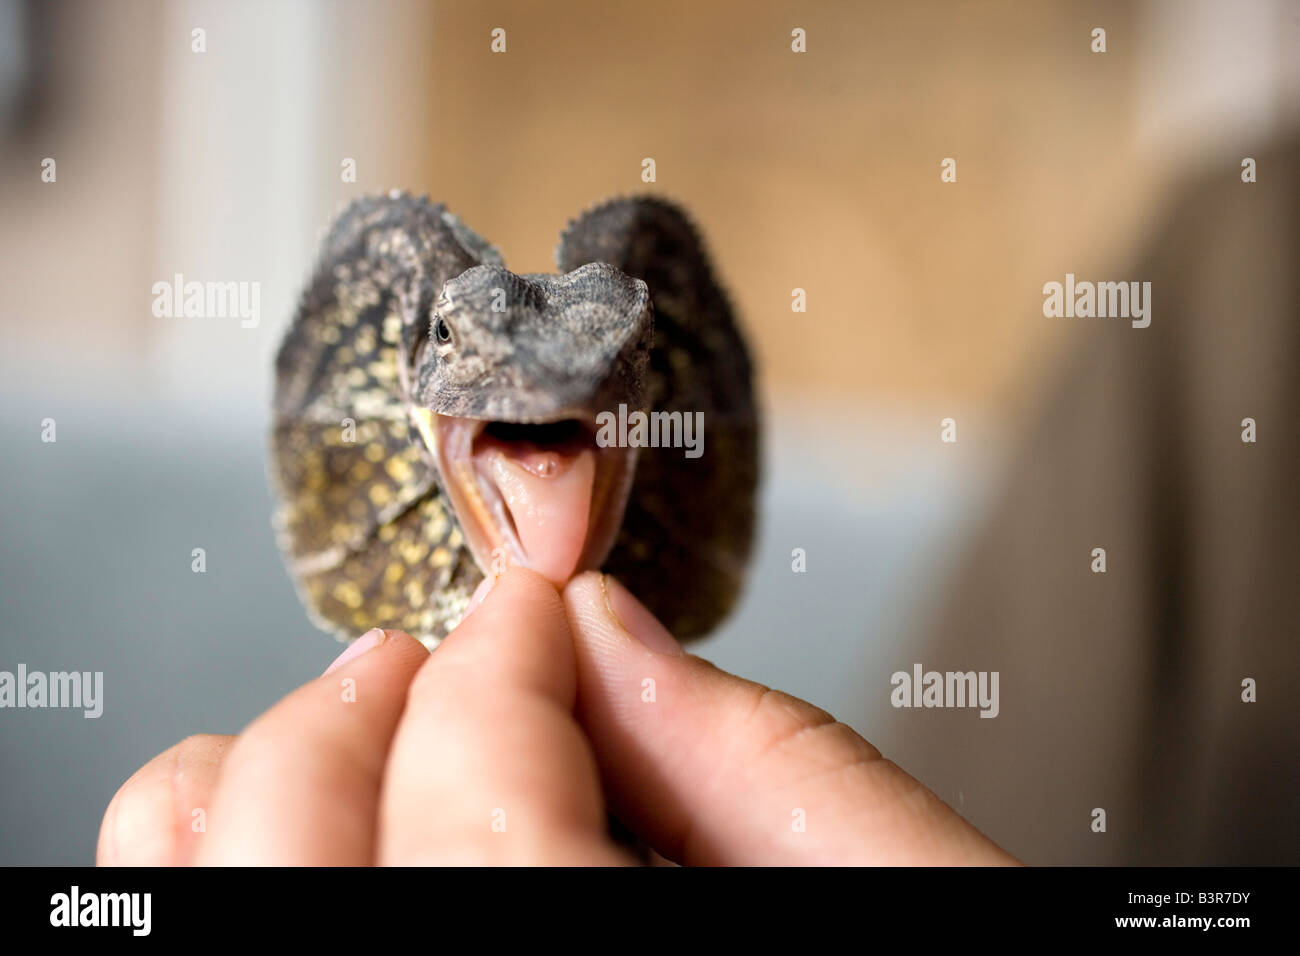 view of frilled lizard, mouth open Stock Photo